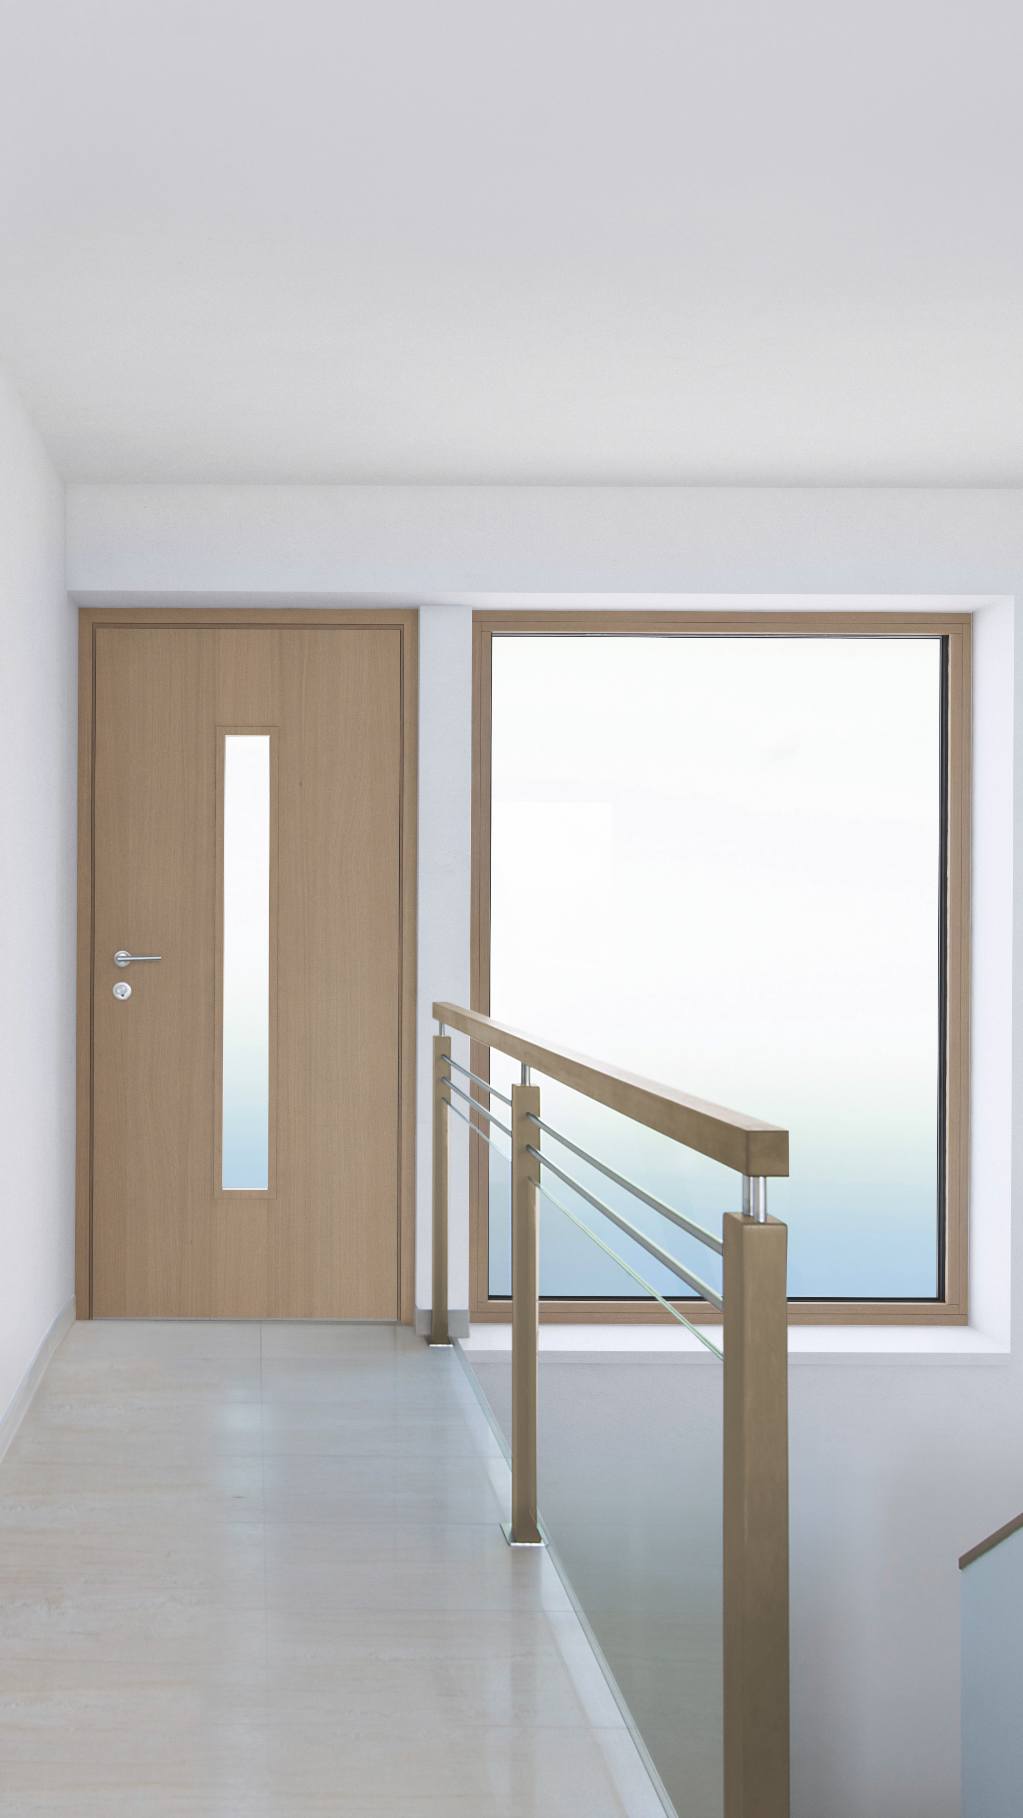 Internorm Entrance Doors - secure and stylish